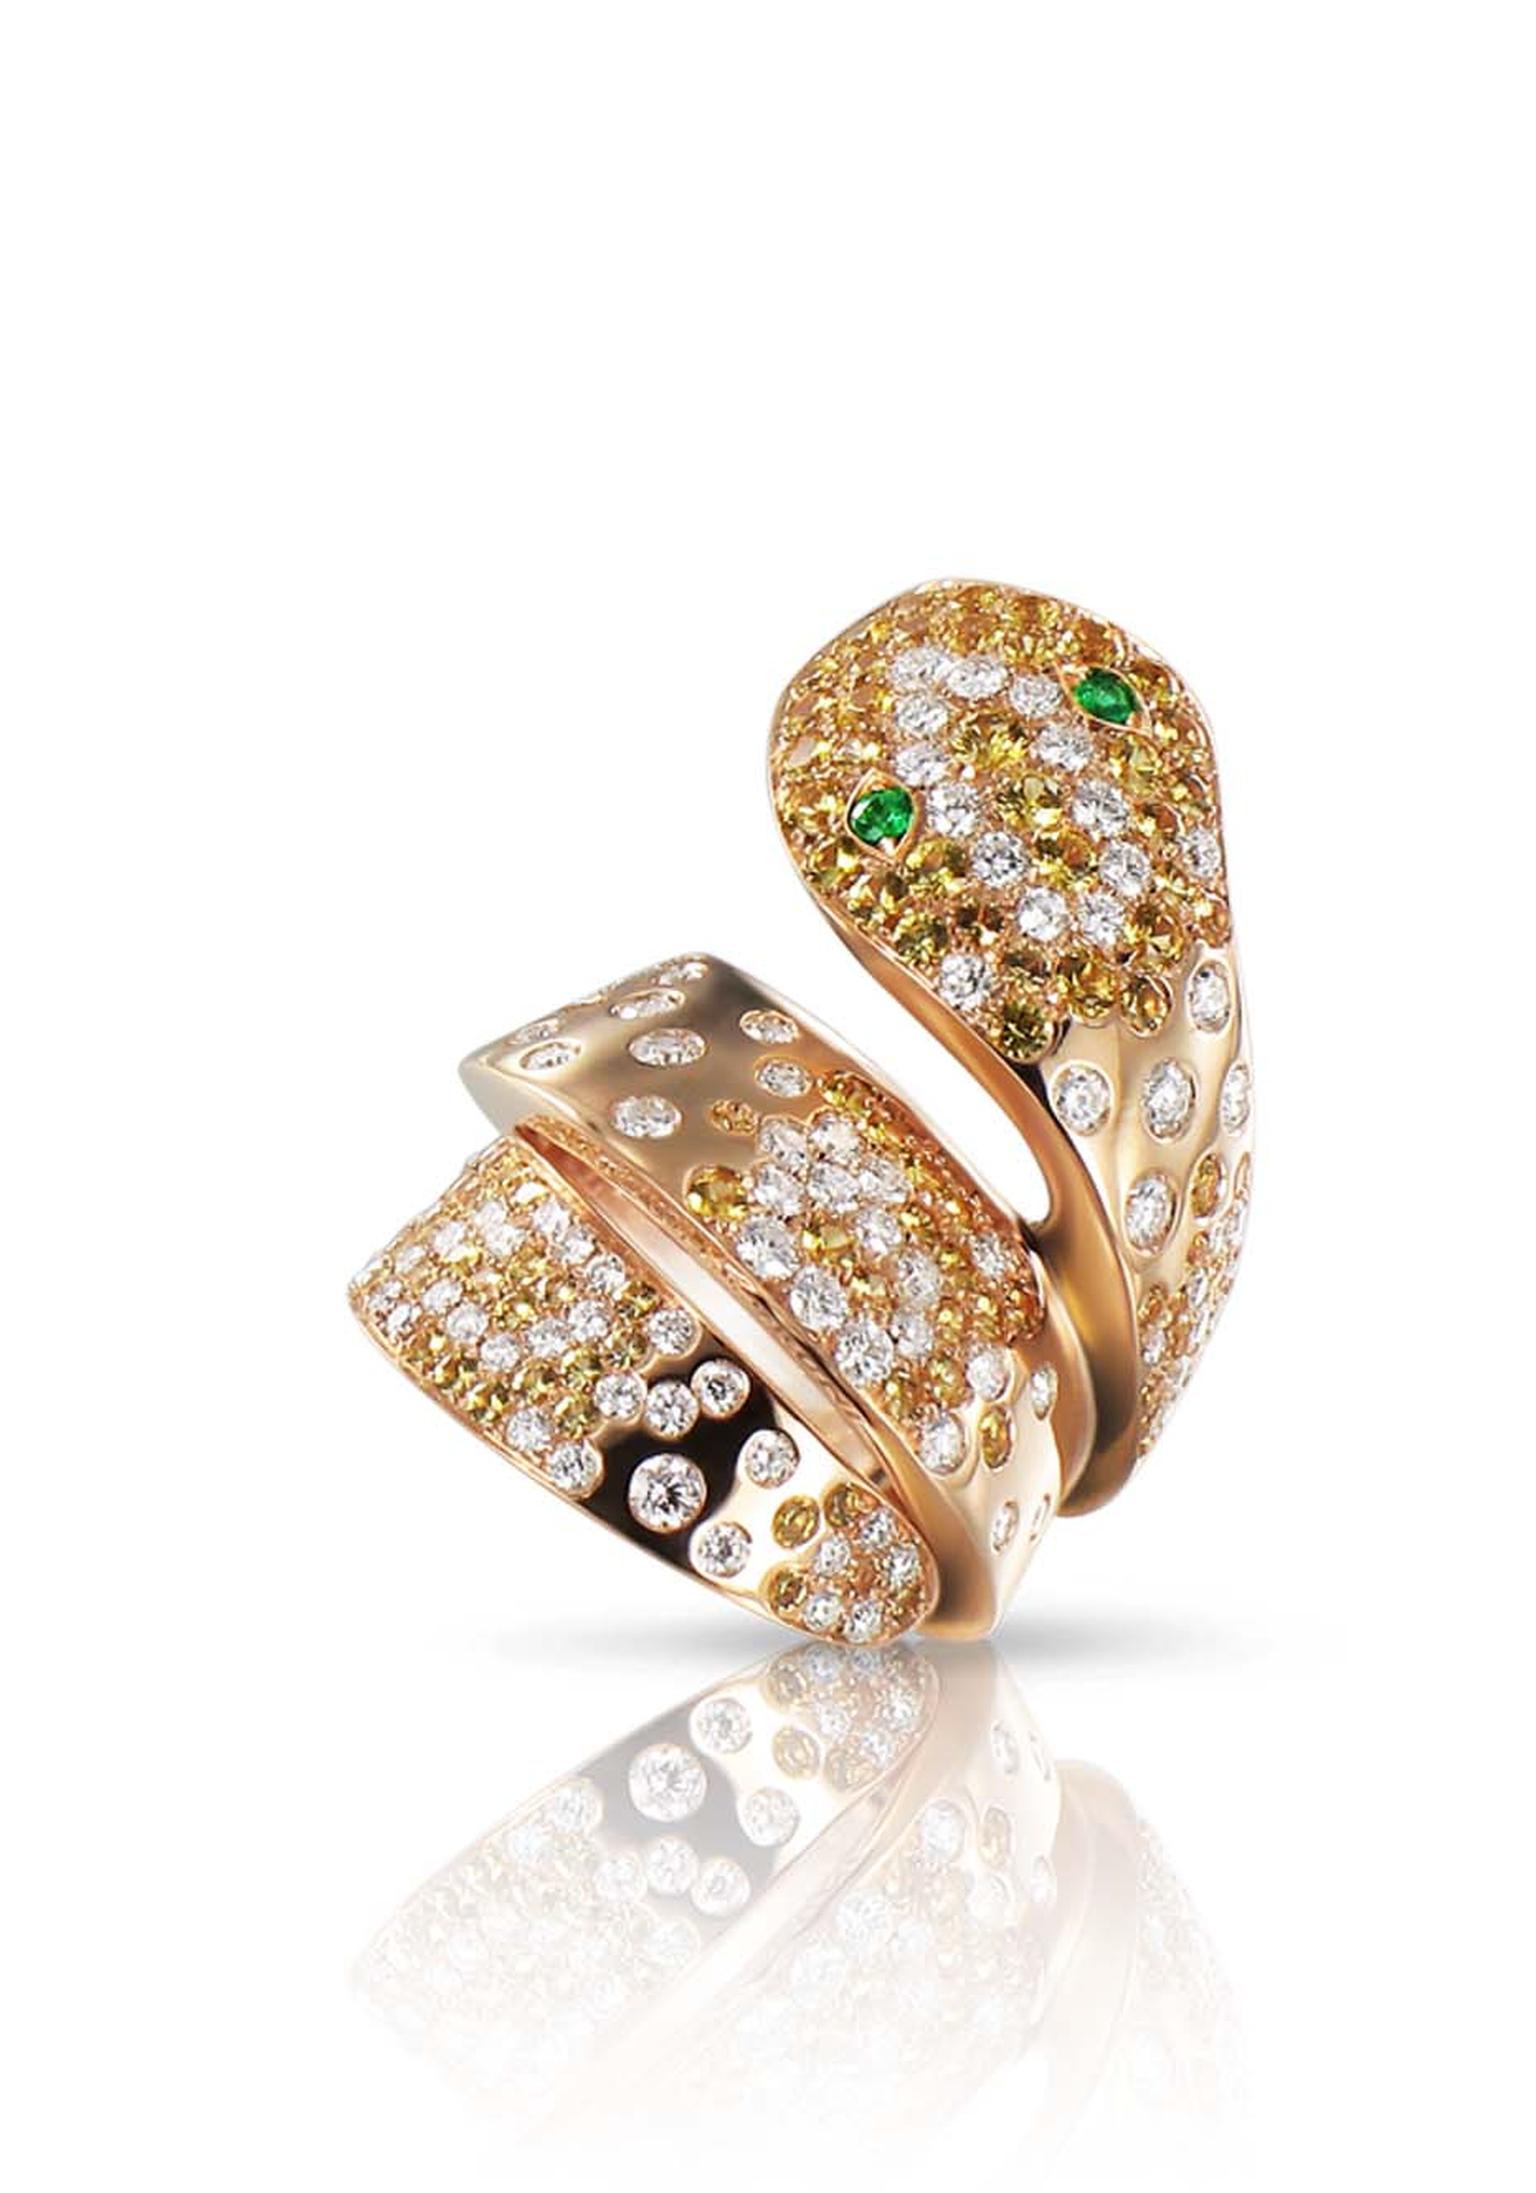 Pasquale Bruni impressive gold high jewellery snake ring with diamonds.